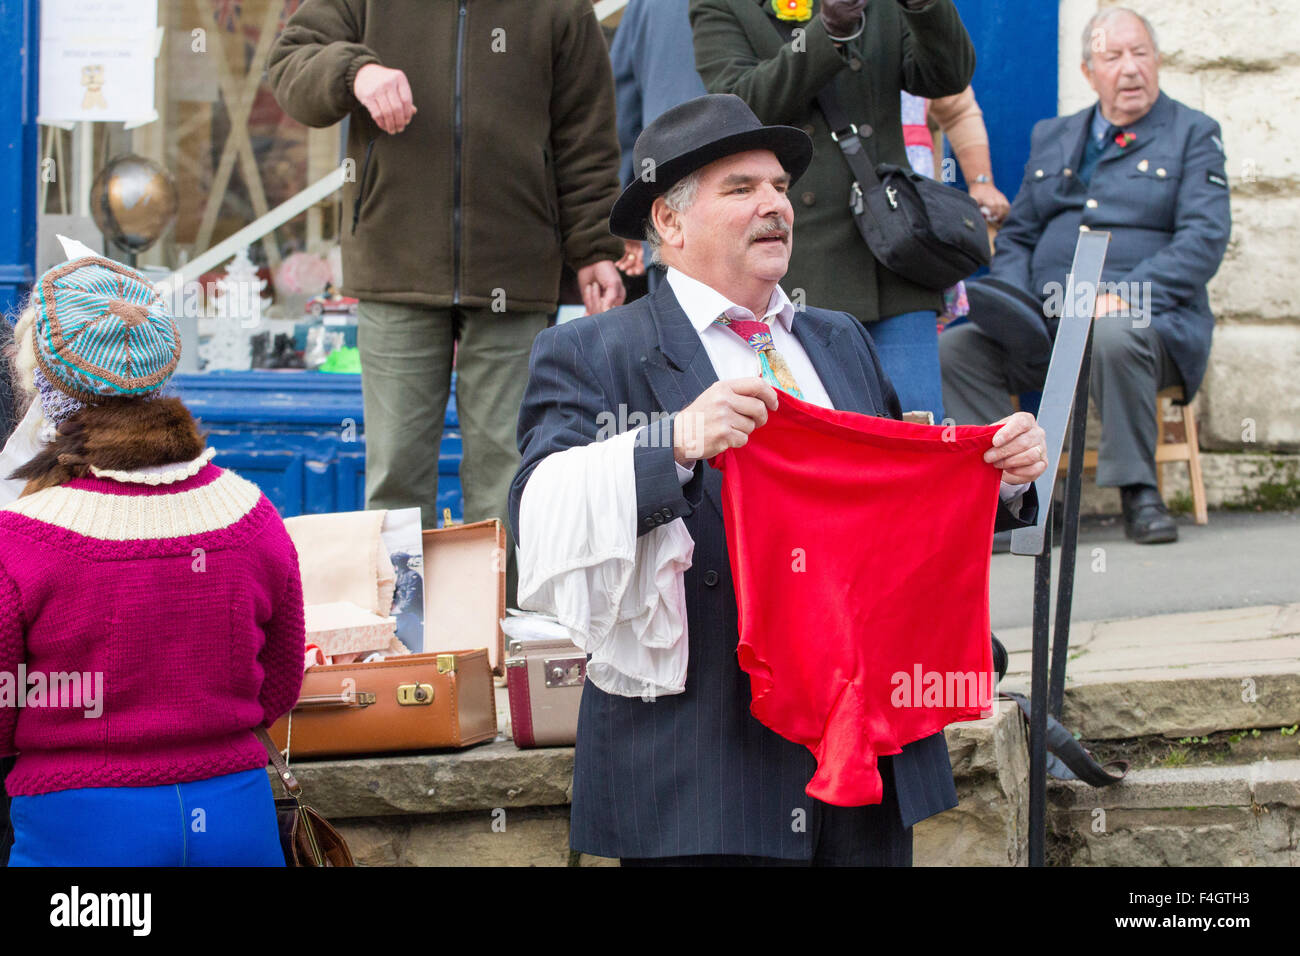 Pickering, North Yorkshire, UK. 17th October, 2015. Pickering`s annual Wartime and 40`s Weekend attracts thousands, with World War 2 living history camps and battle re-enactments amomg the attractions. PICTURED:  Man pretending to sell silk knickers and stockings. Stock Photo